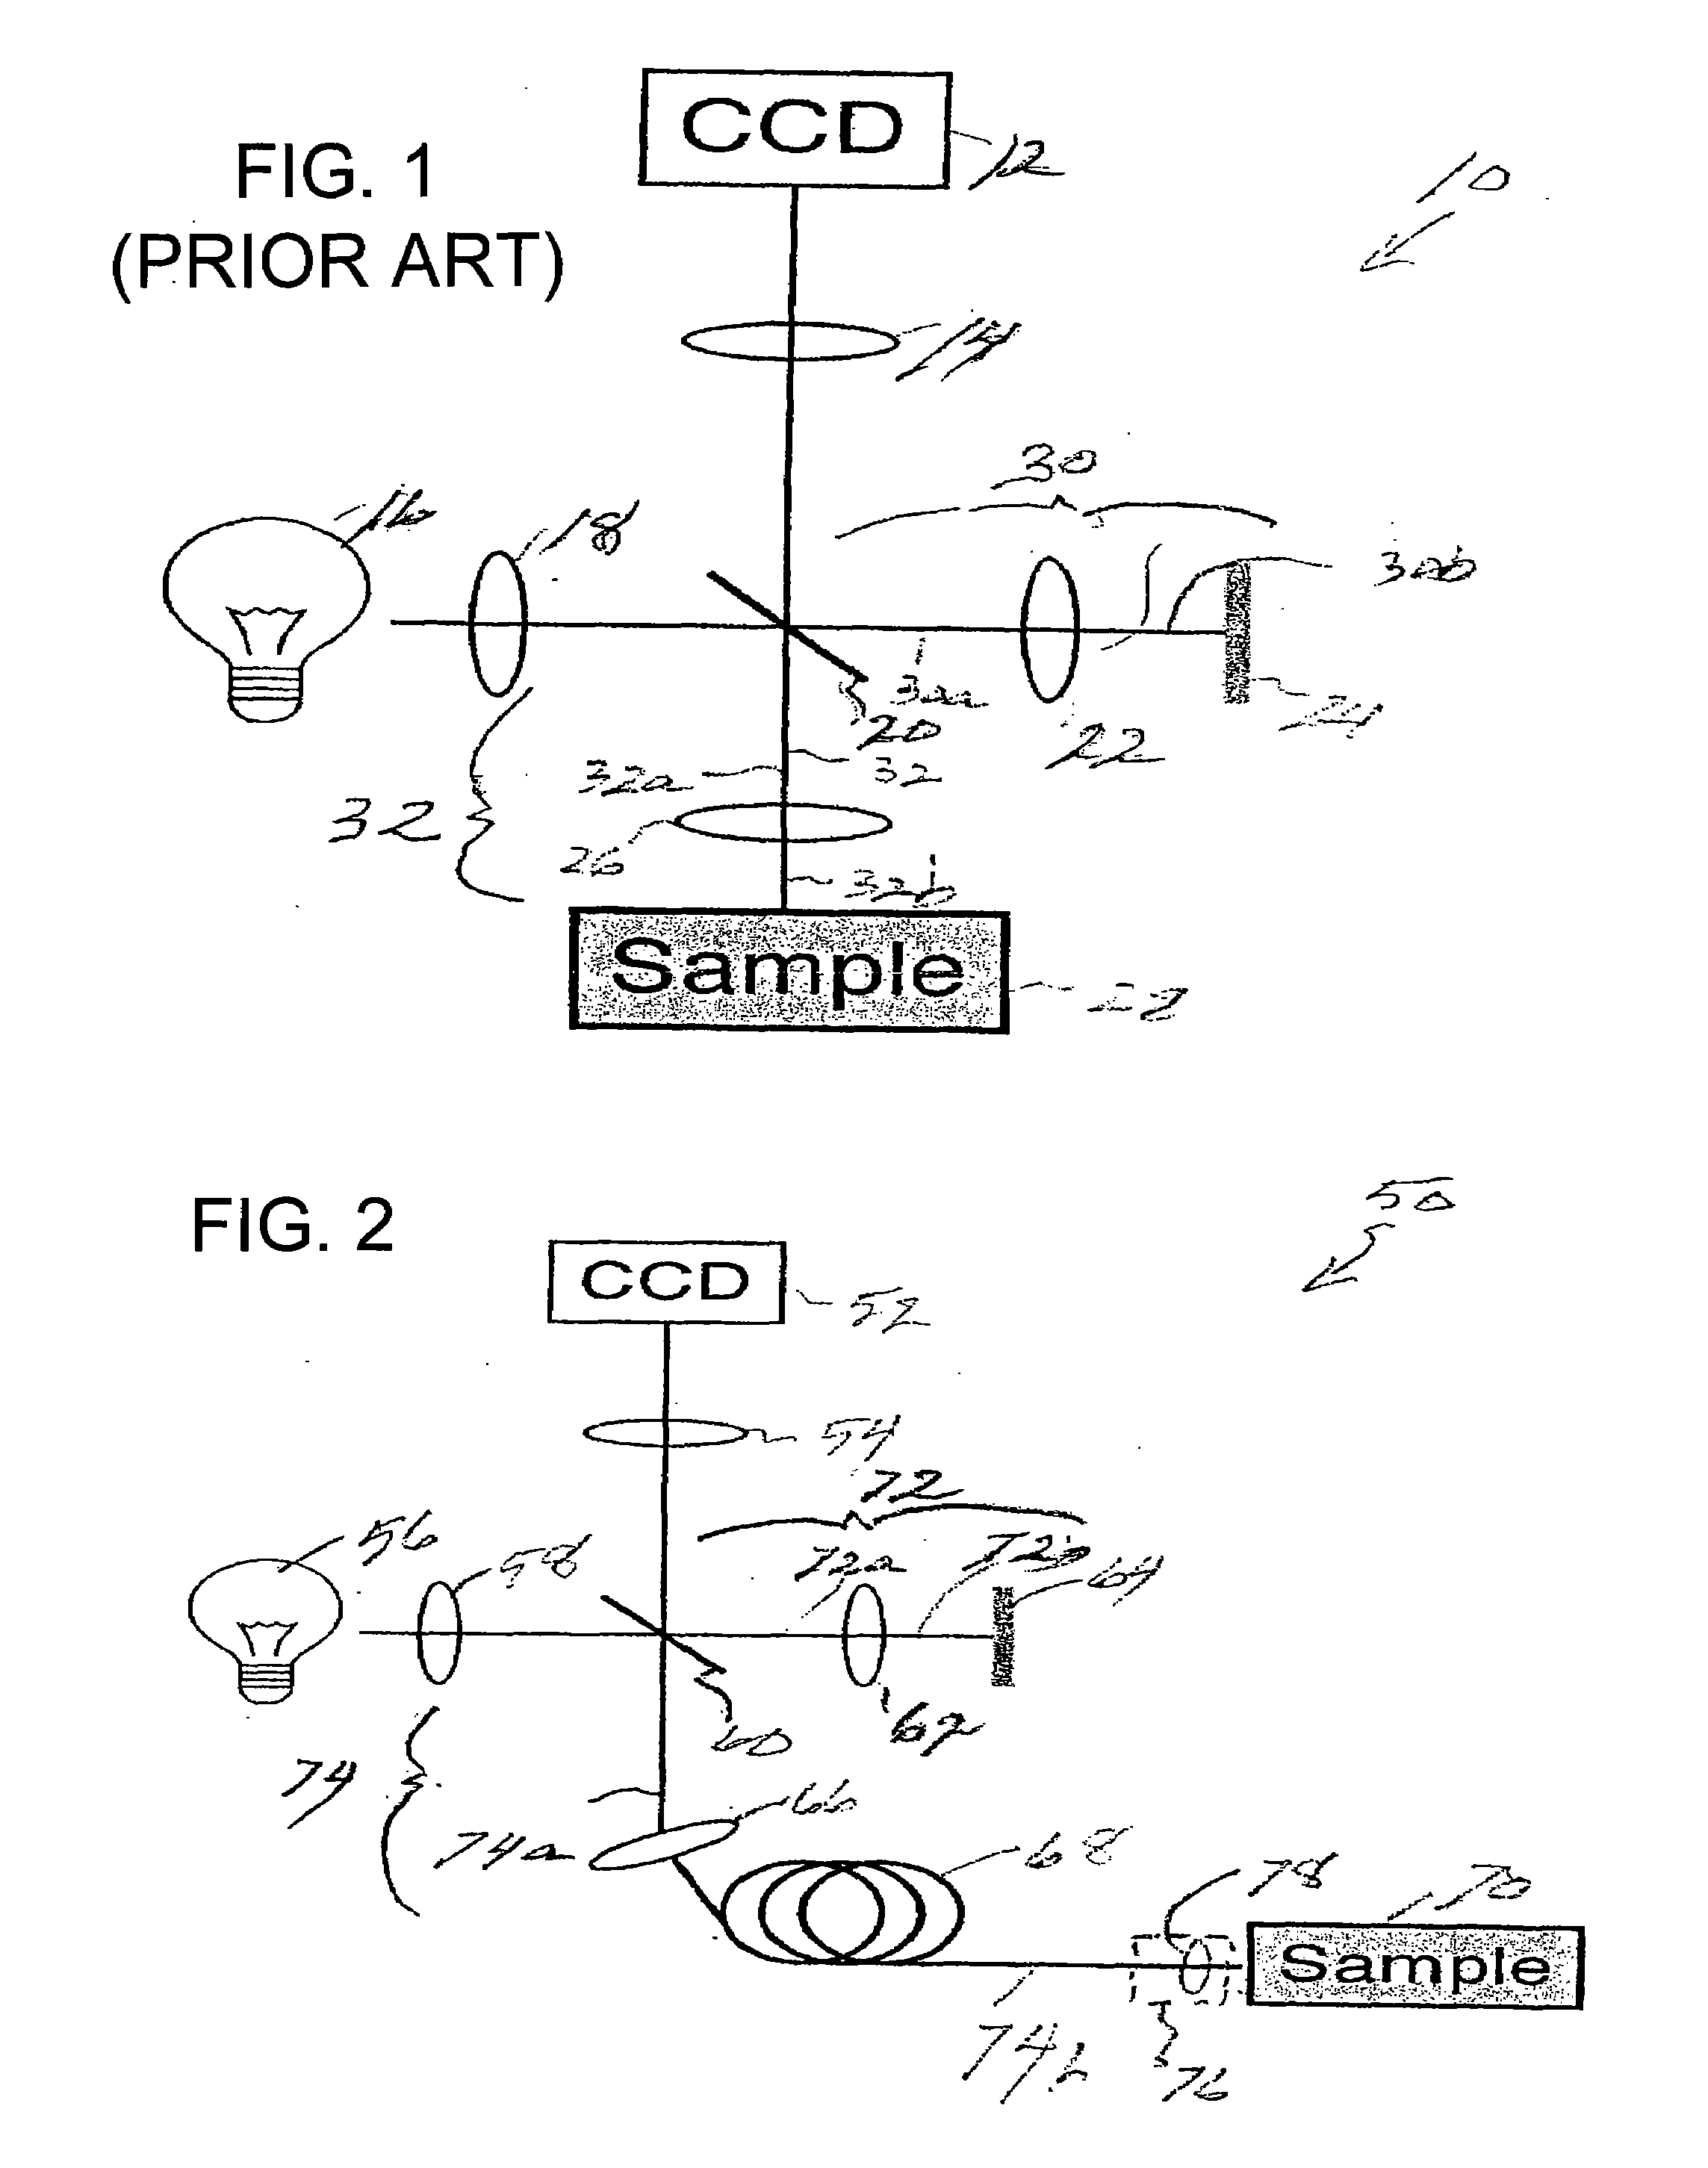 Systems and methods for generating data using one or more endoscopic microscopy techniques